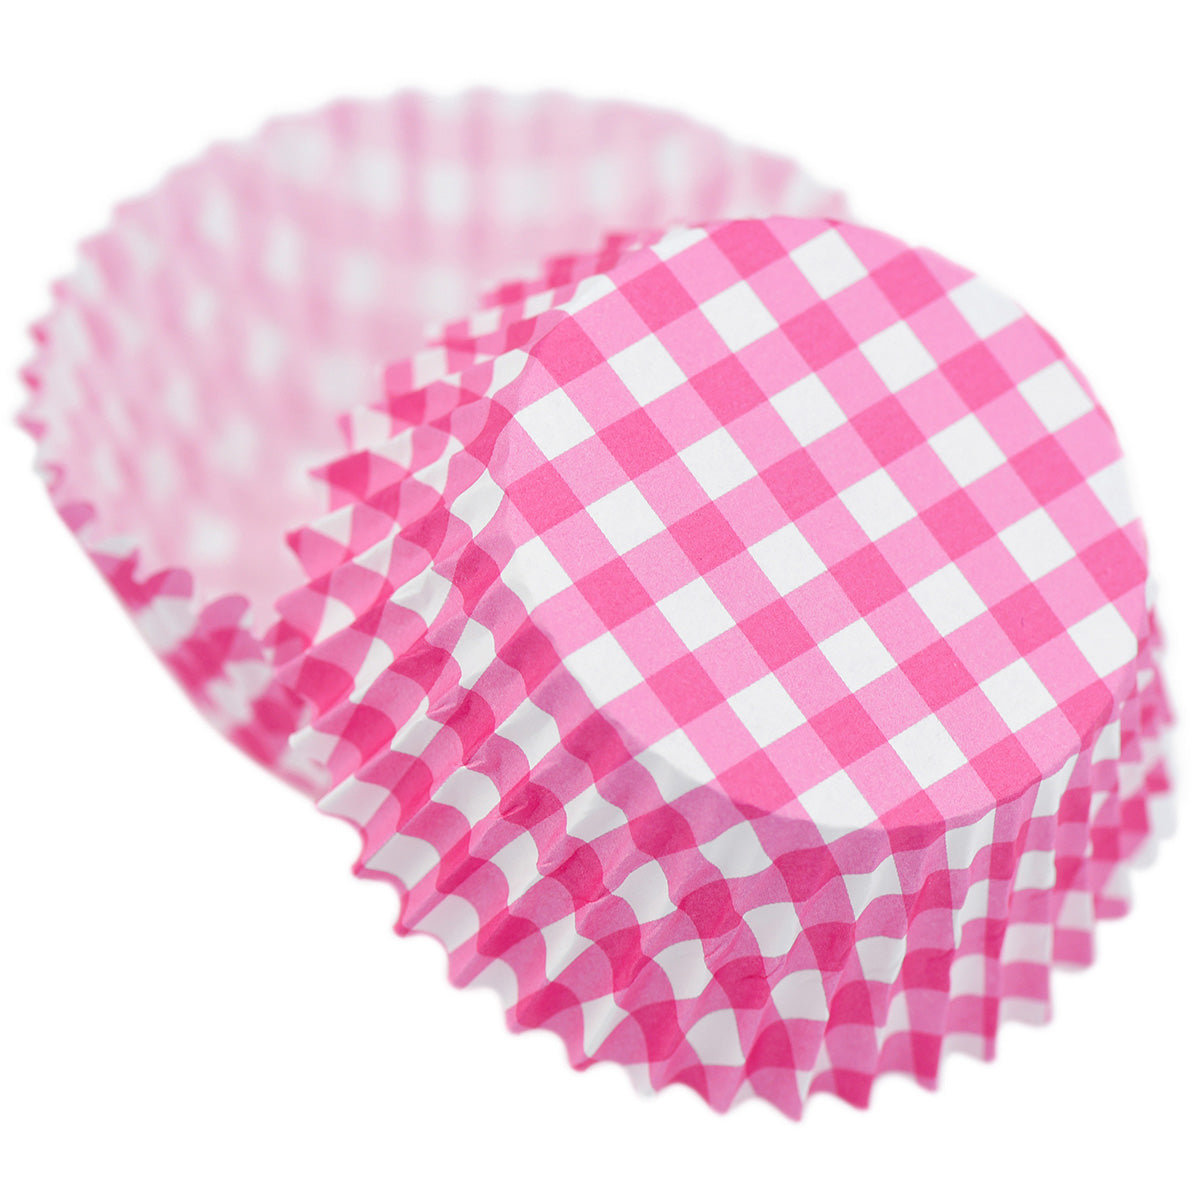 100-Pack Cupcake Muffin Baking Paper Cases Liners Style 46